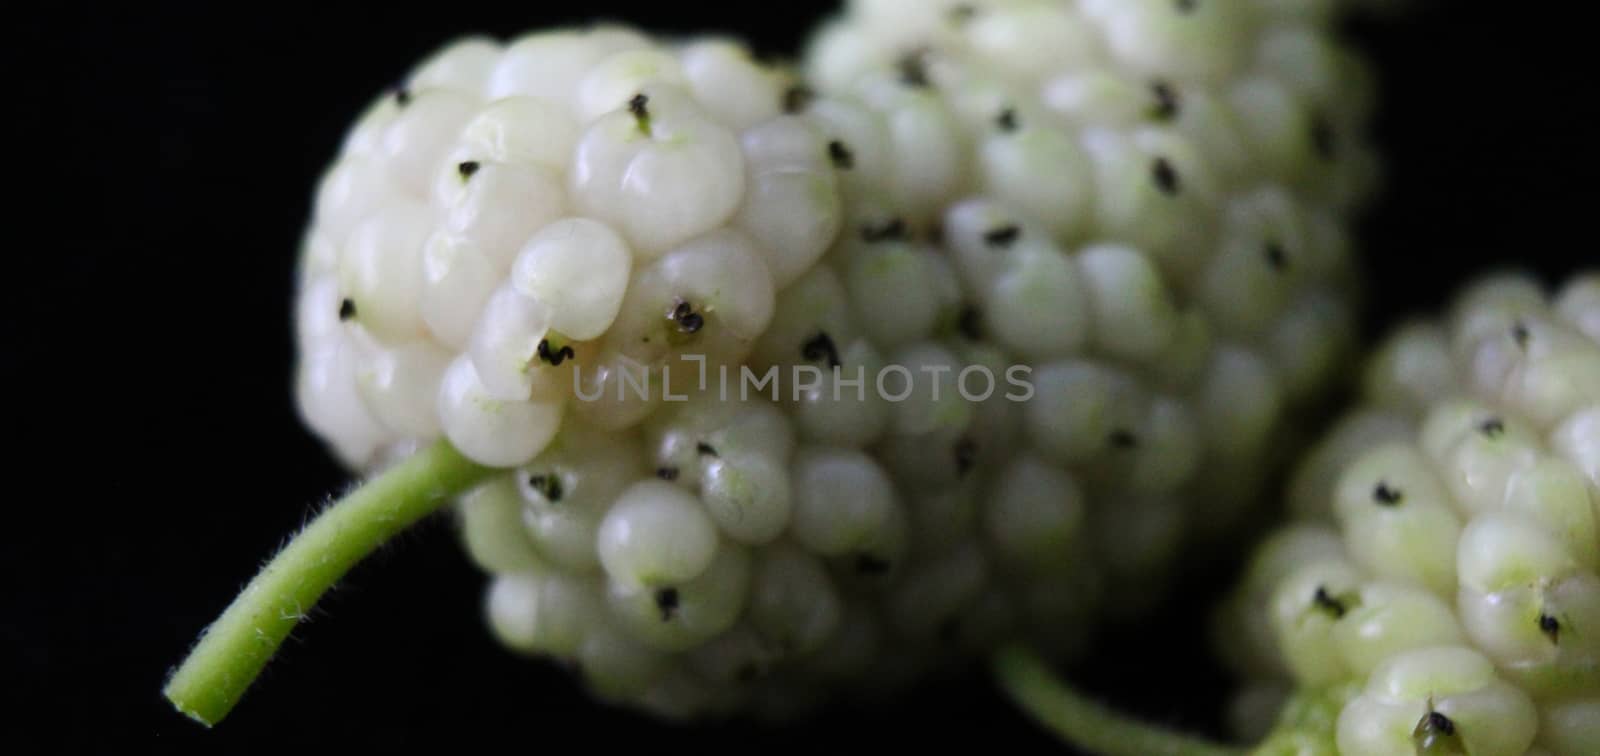 Macro of white mulberry fruit. Morus alba, white mulberry. On a black background. Beja, Portugal.